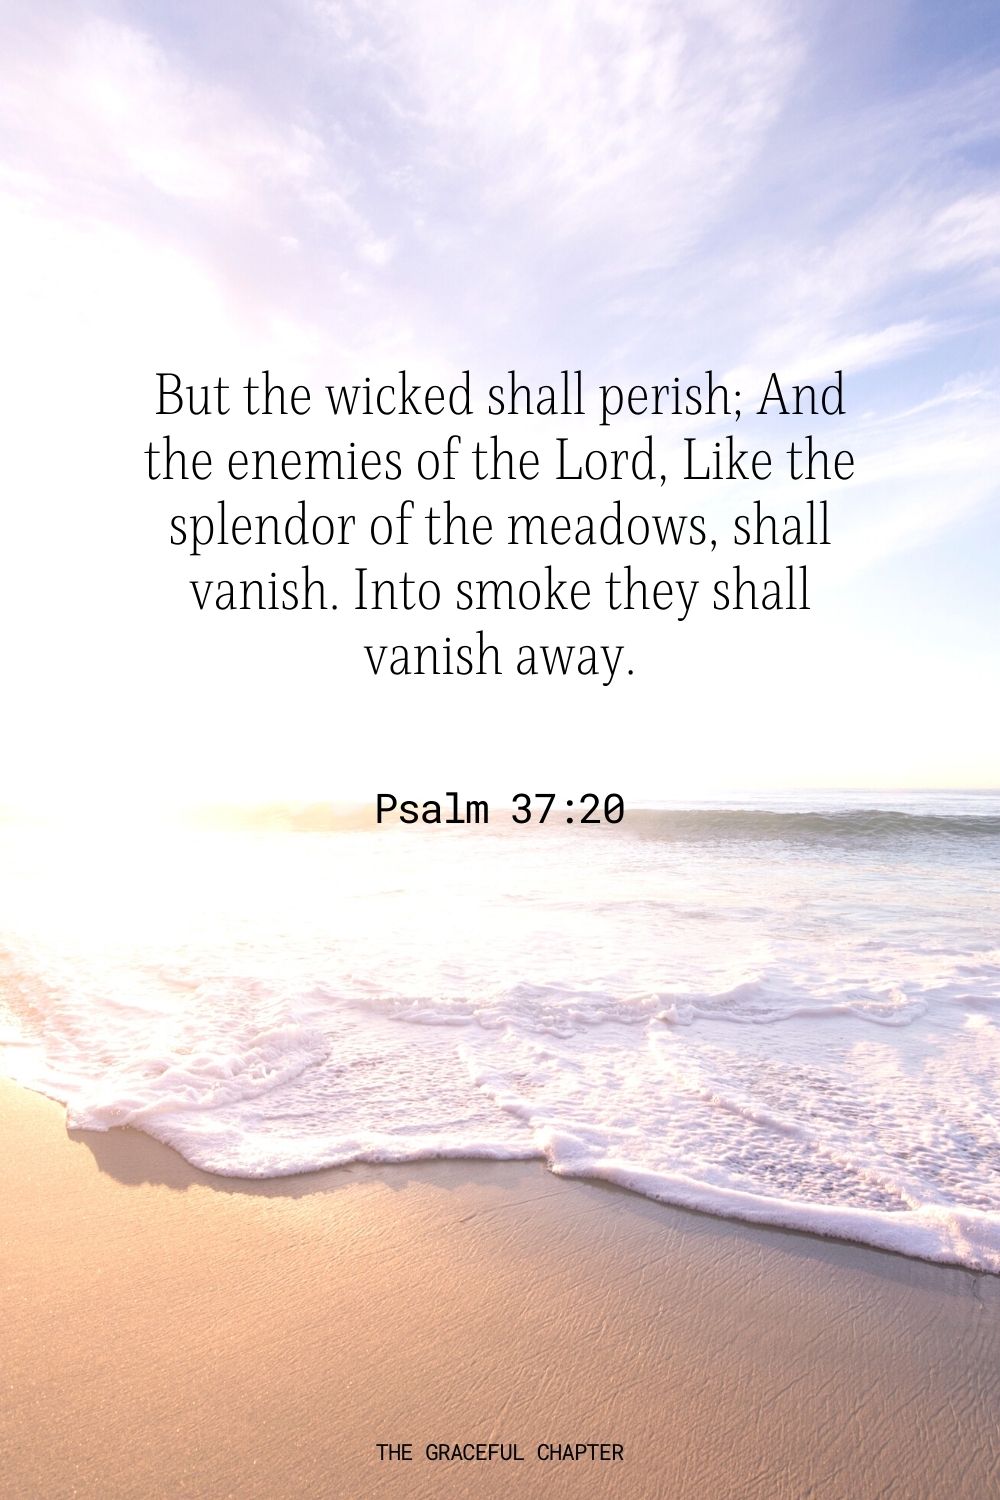 But the wicked shall perish; And the enemies of the Lord, Like the splendor of the meadows, shall vanish. Into smoke they shall vanish away. Psalm 37:20